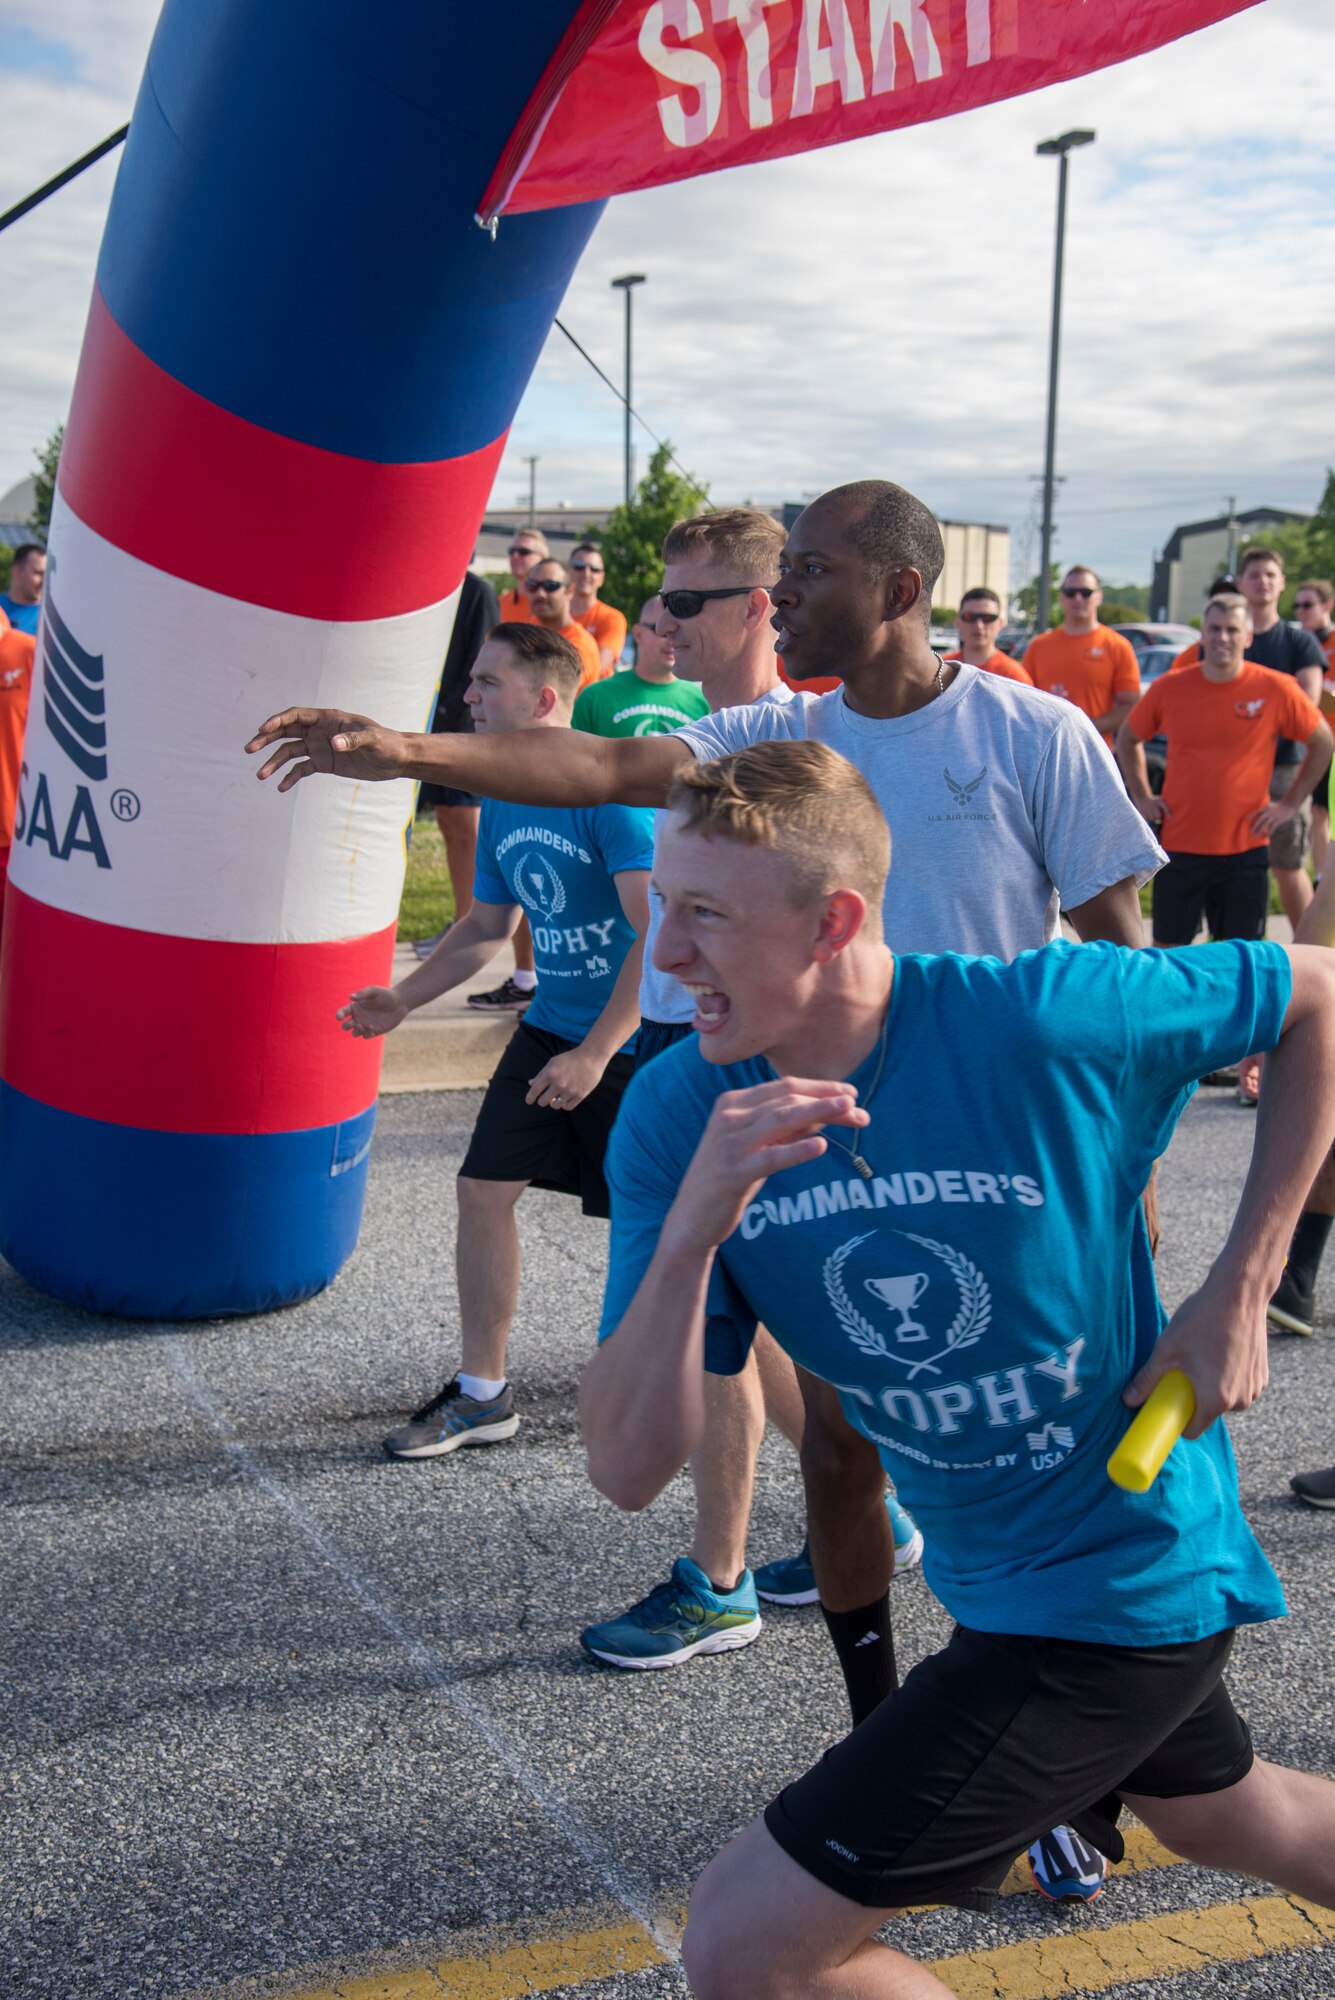 Airmen wait to receive the baton before sprinting to their teammate June 14, 2019 at Dover Air Force Base, Del. The relay race kicked off the event where 4 teams compete against one another for each heat. (U.S. Air Force photo by A1C Jonathan Harding)